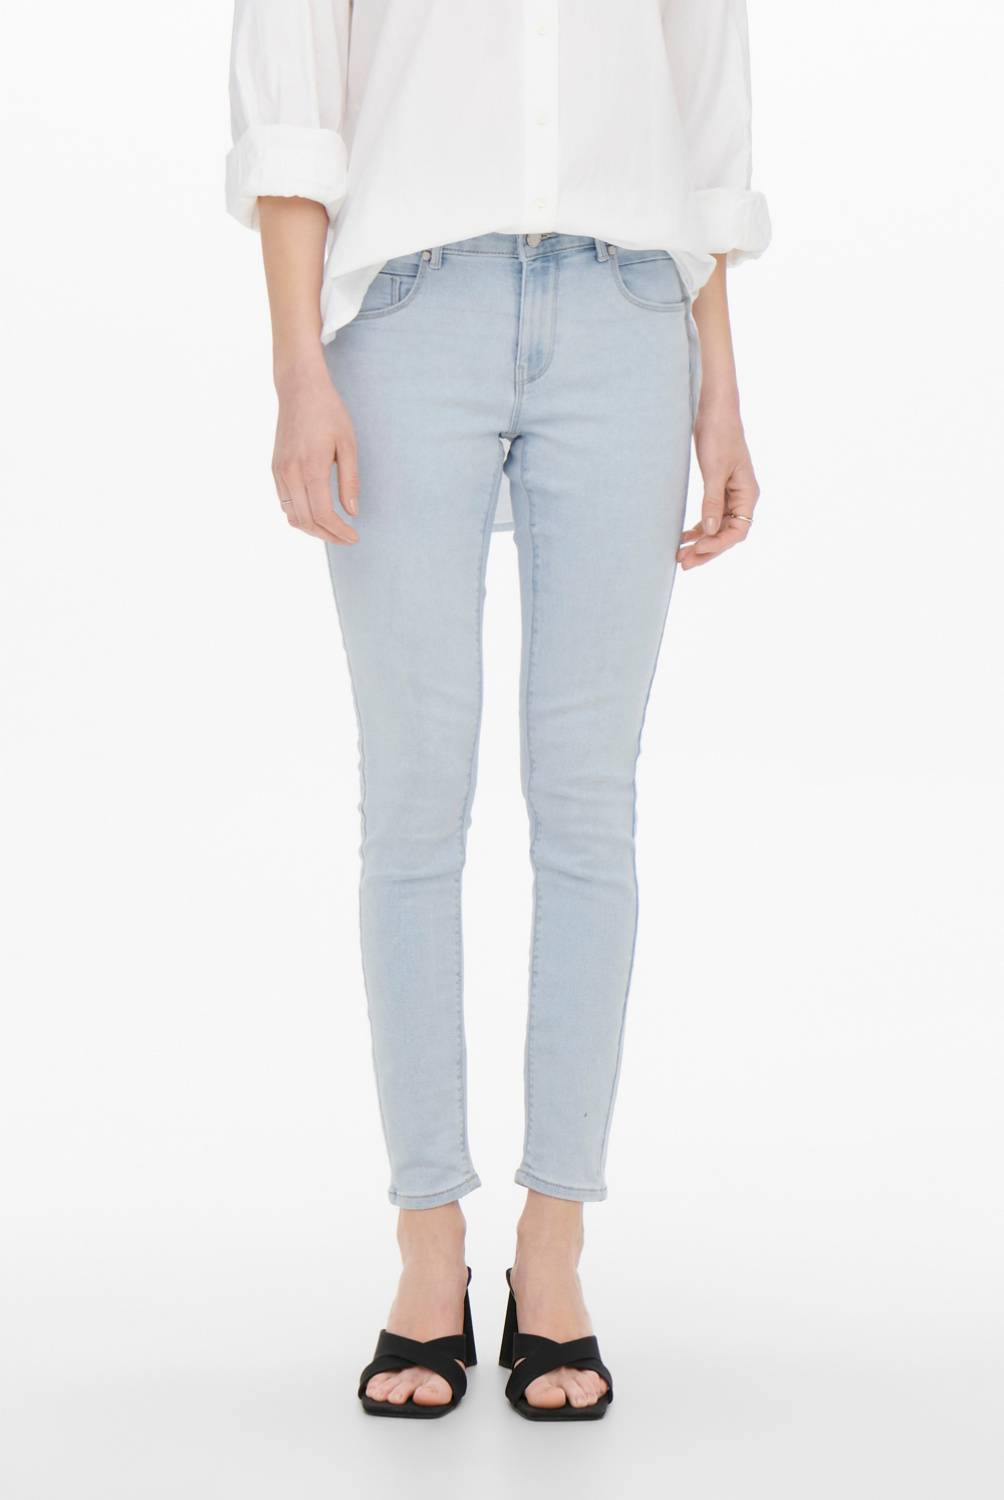 ONLY - Jeans Skinny Tiro Alto Mujer Only